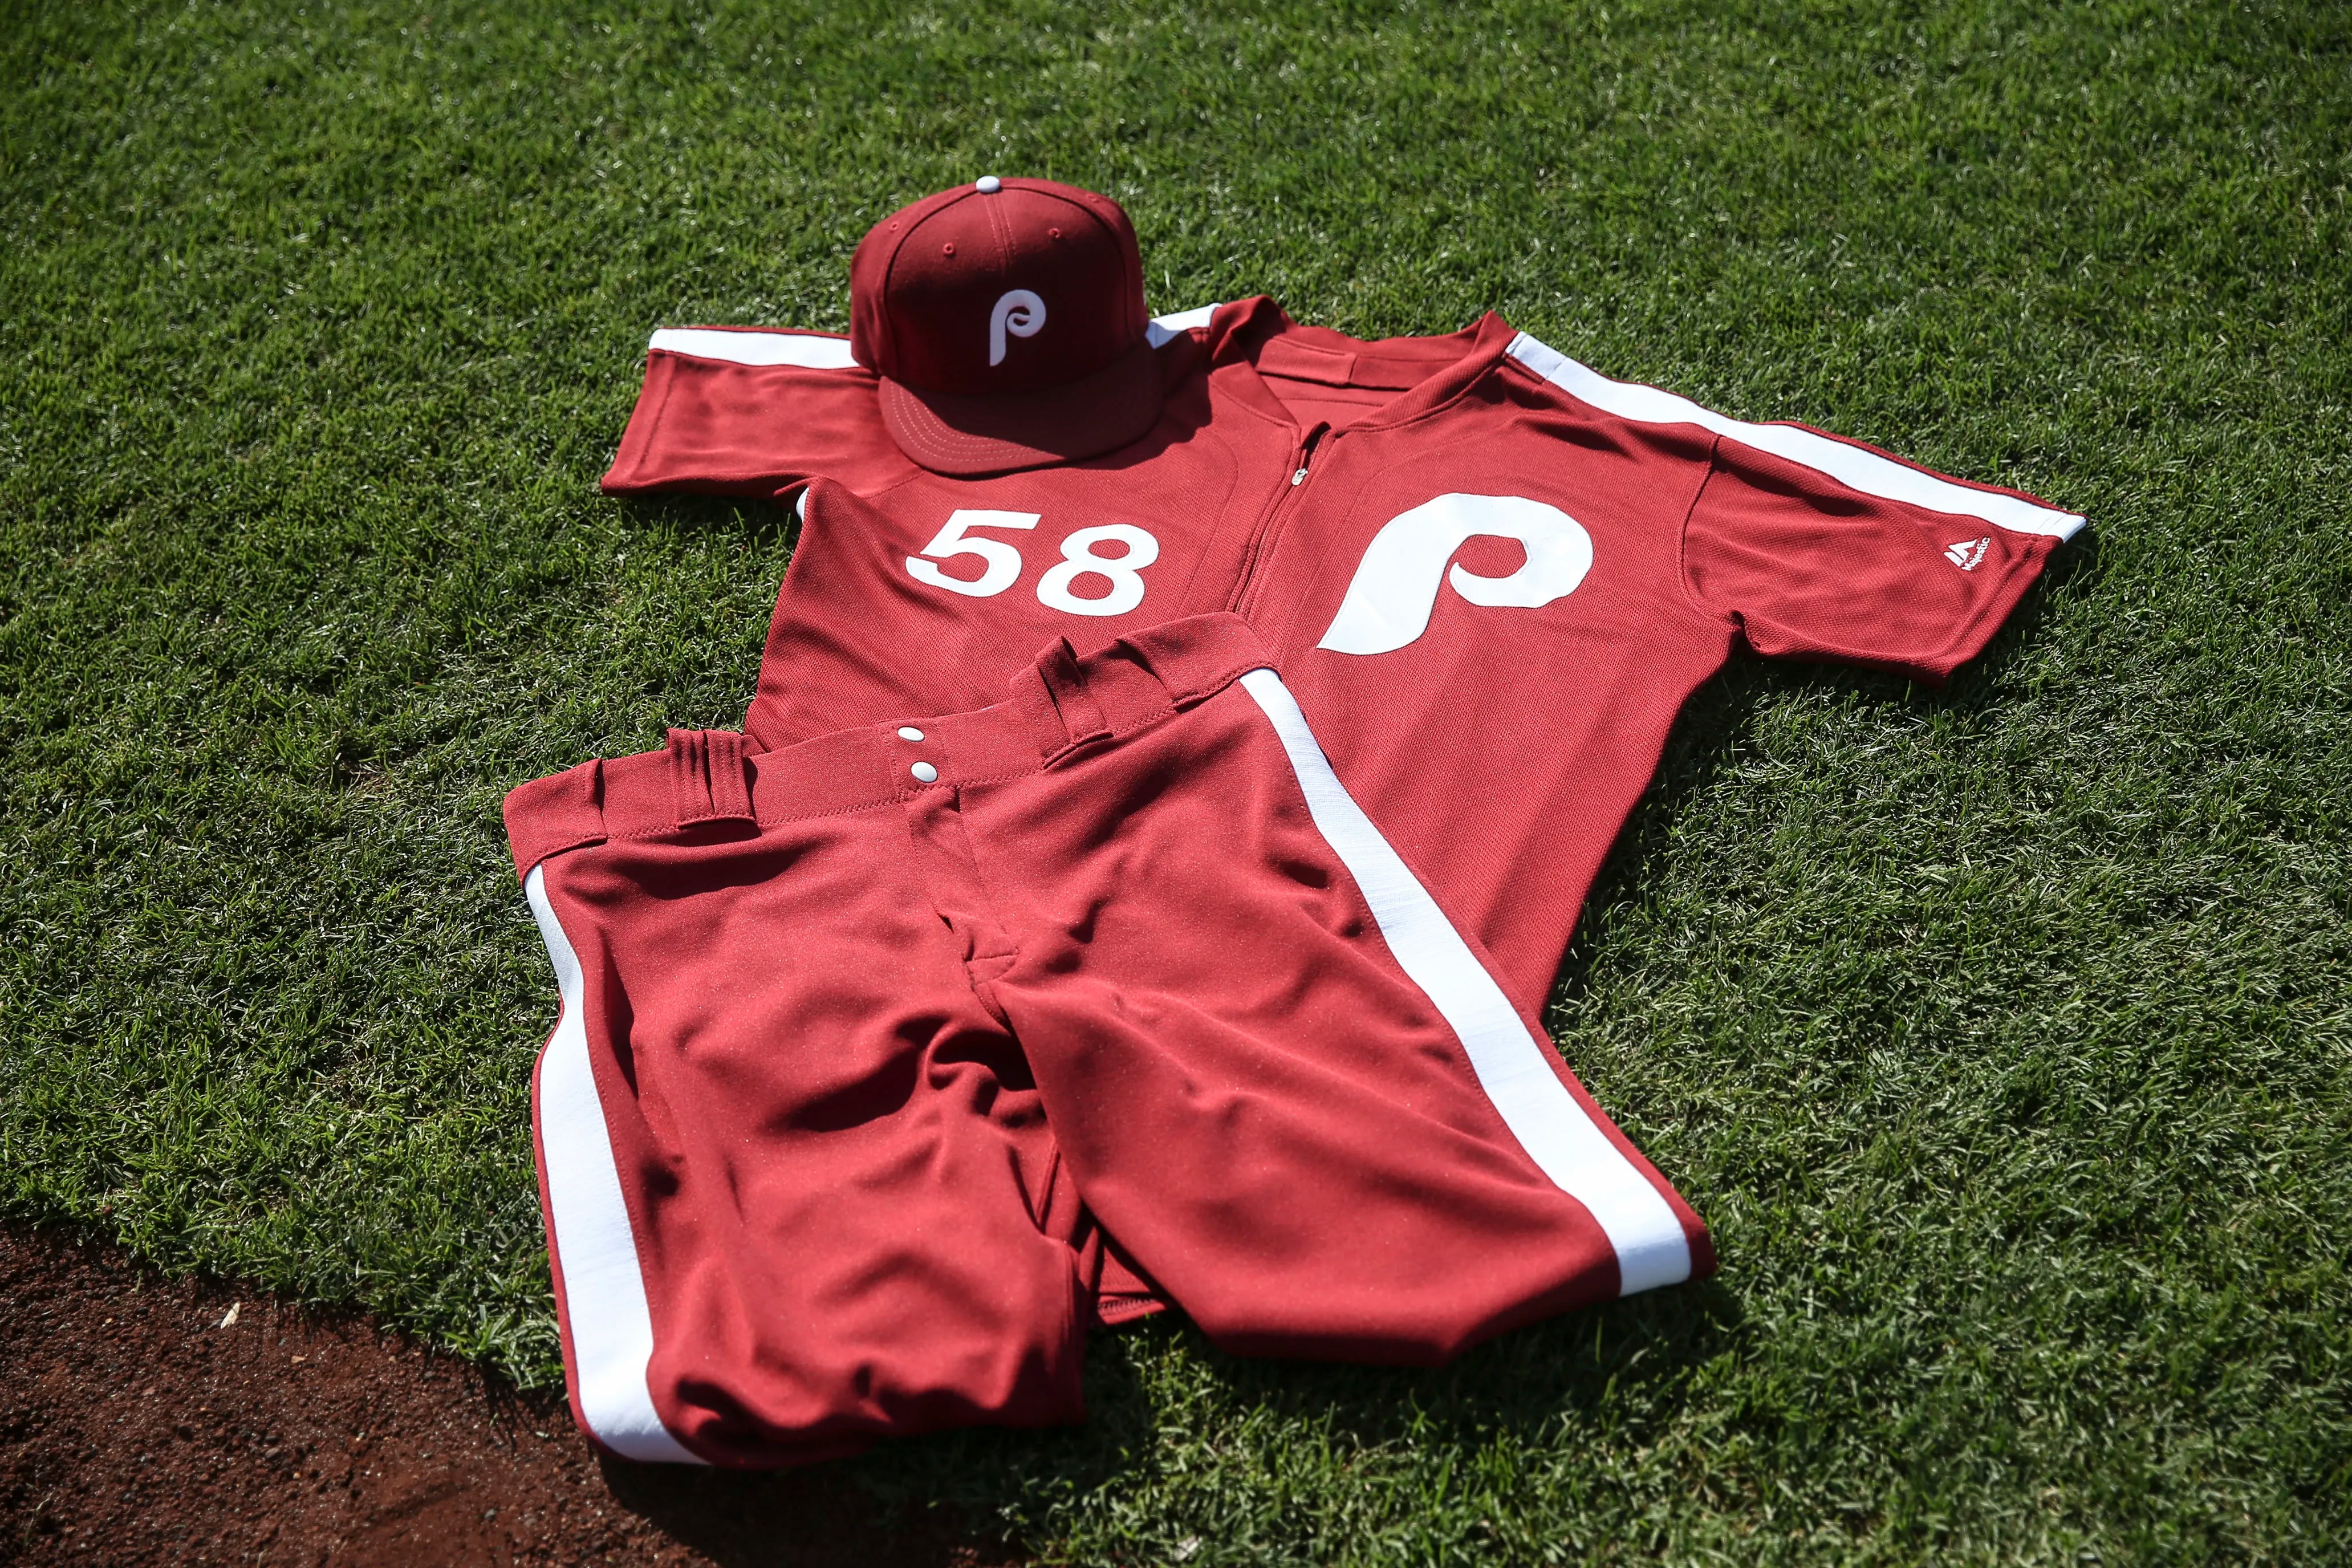 Phillies City Connect Jerseys inspiring by the B Ross flag : r